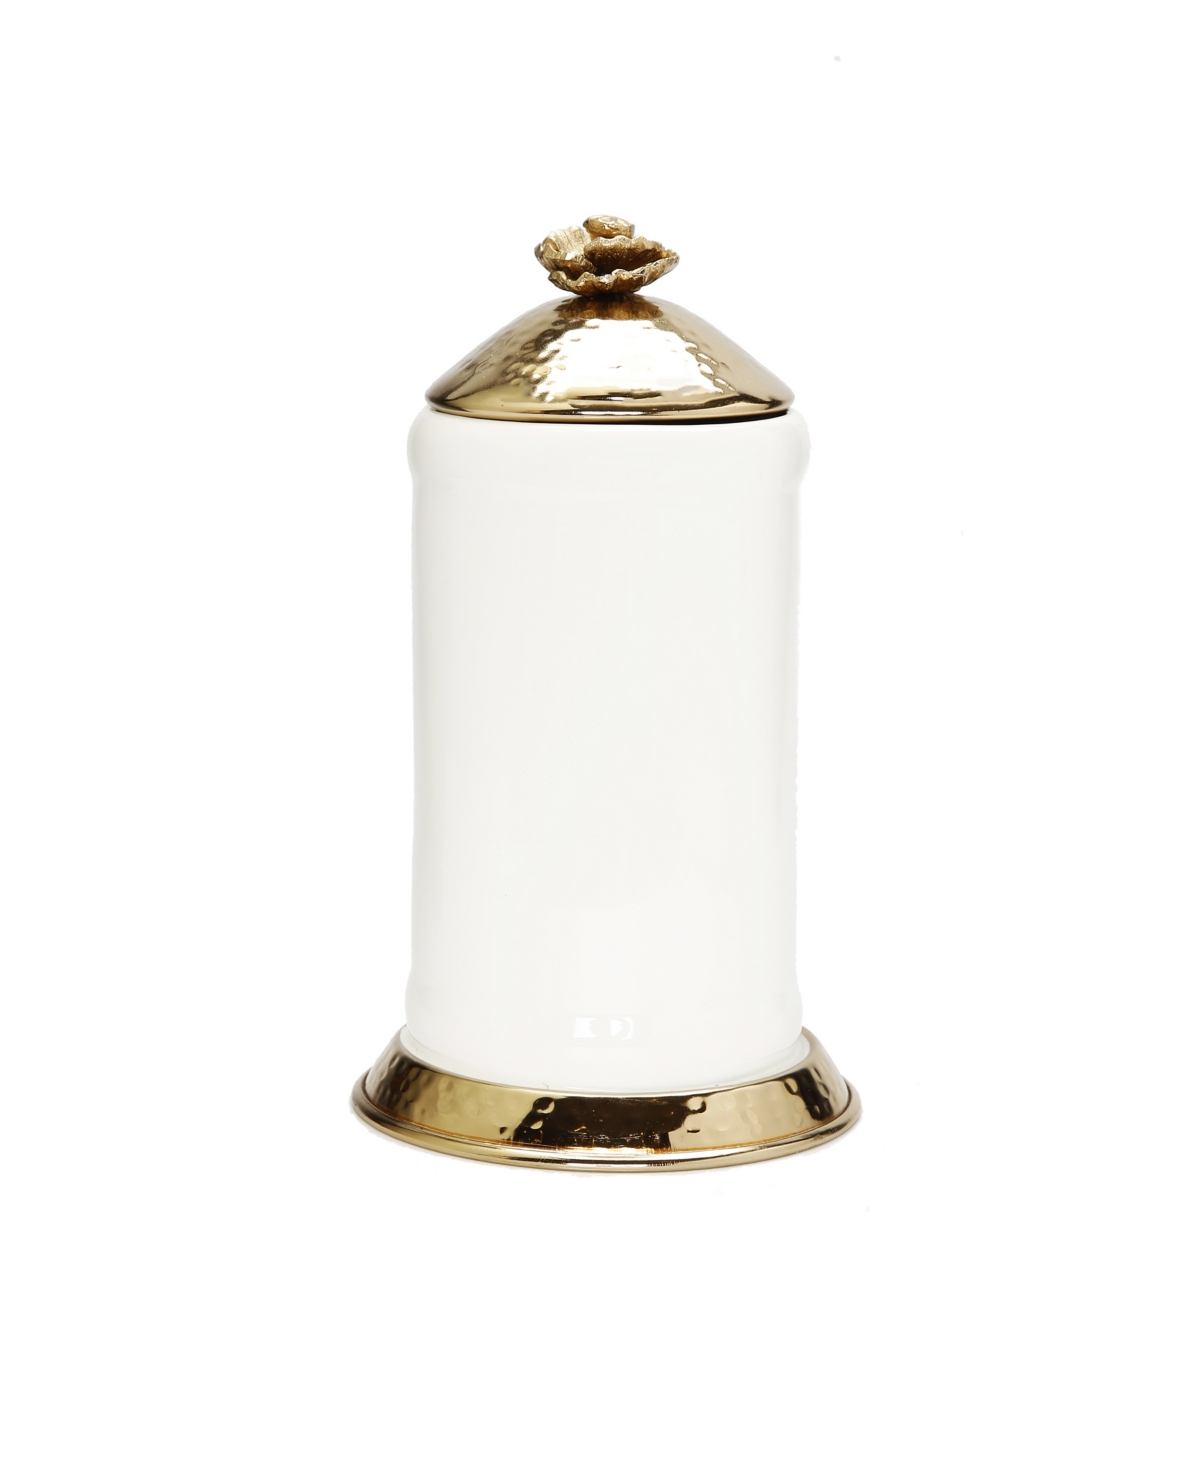 Glass Canister Hammered Lid and Base Flower Knob Set, 2 Piece - White and Gold-Tone